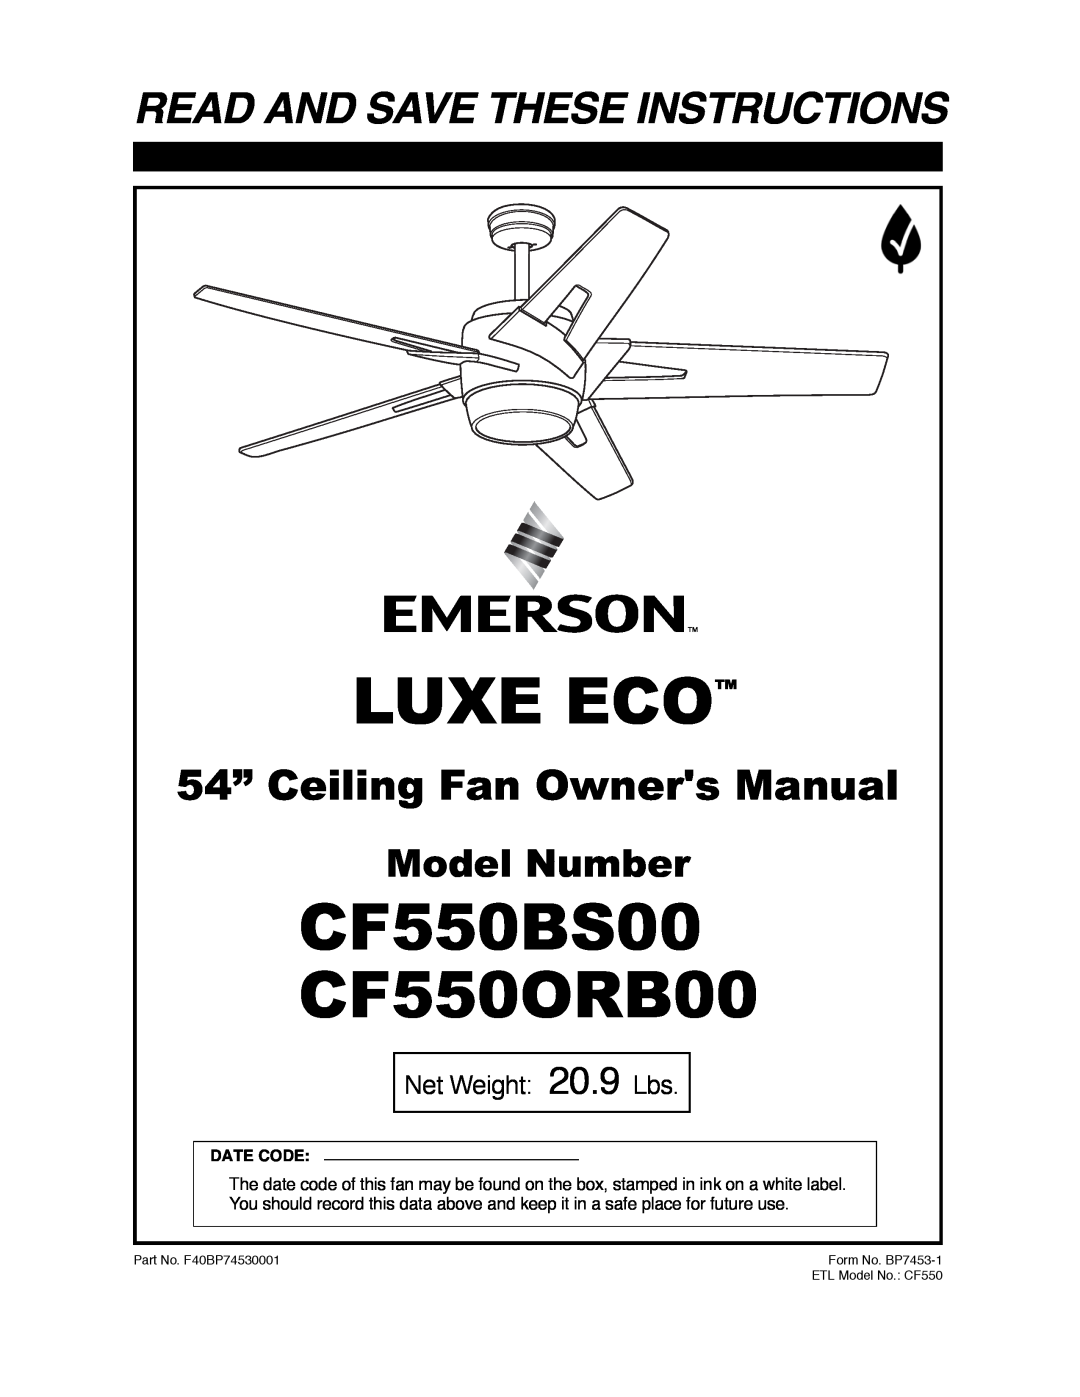 Emerson owner manual Luxe Eco, CF550BS00 CF550ORB00, Read And Save These Instructions, Model Number 